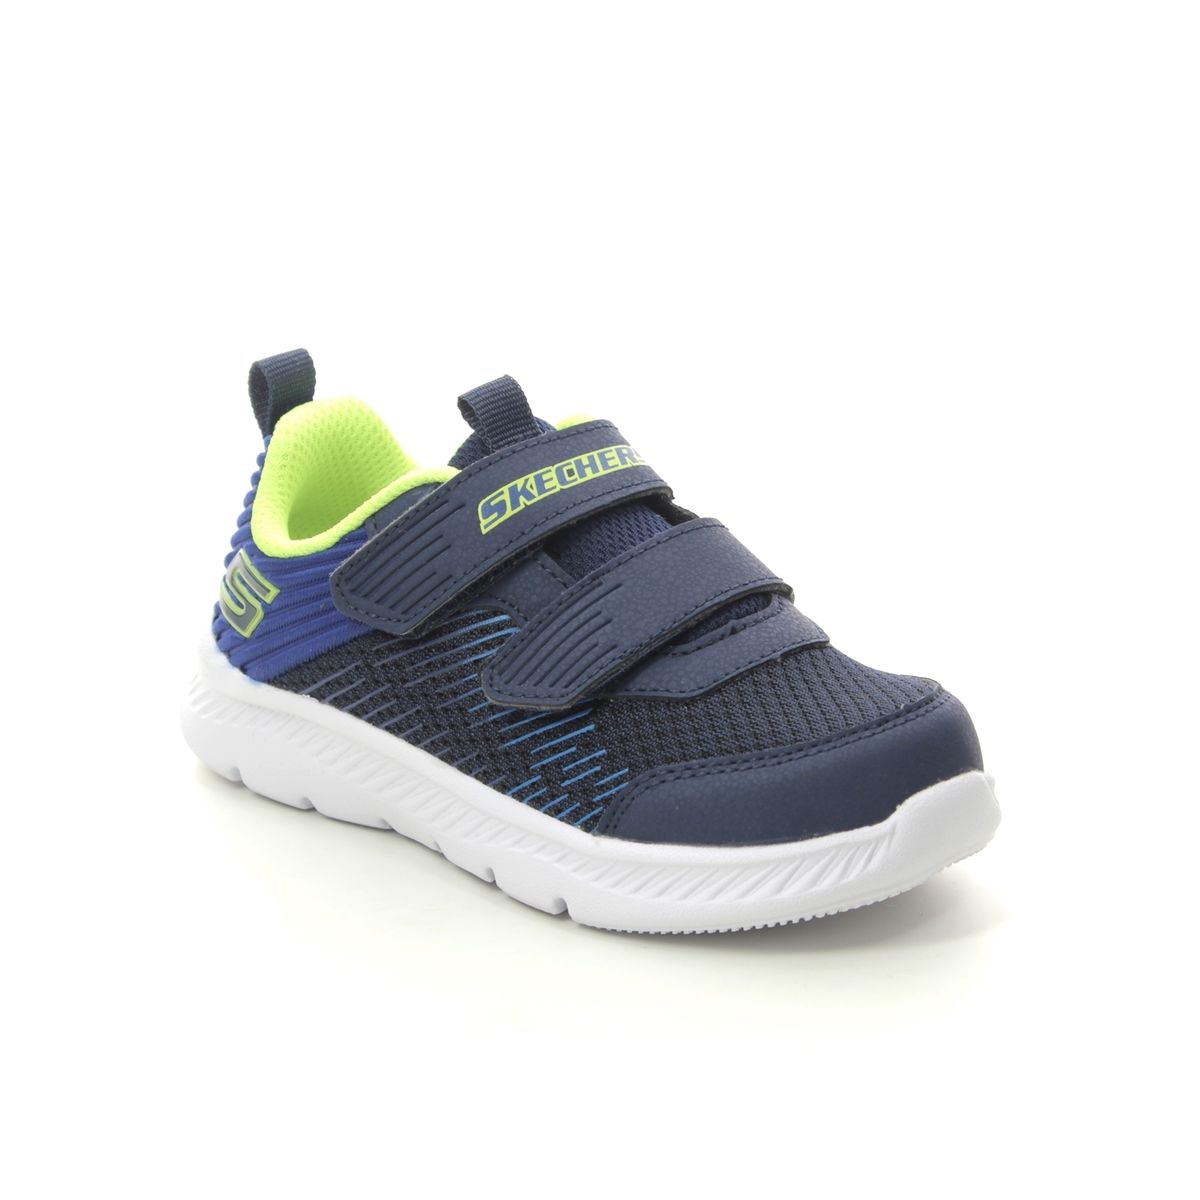 Skechers Comfy Flex 2.0 NVBL Navy Blue Kids trainers 400044N in a Plain Man-made in Size 21